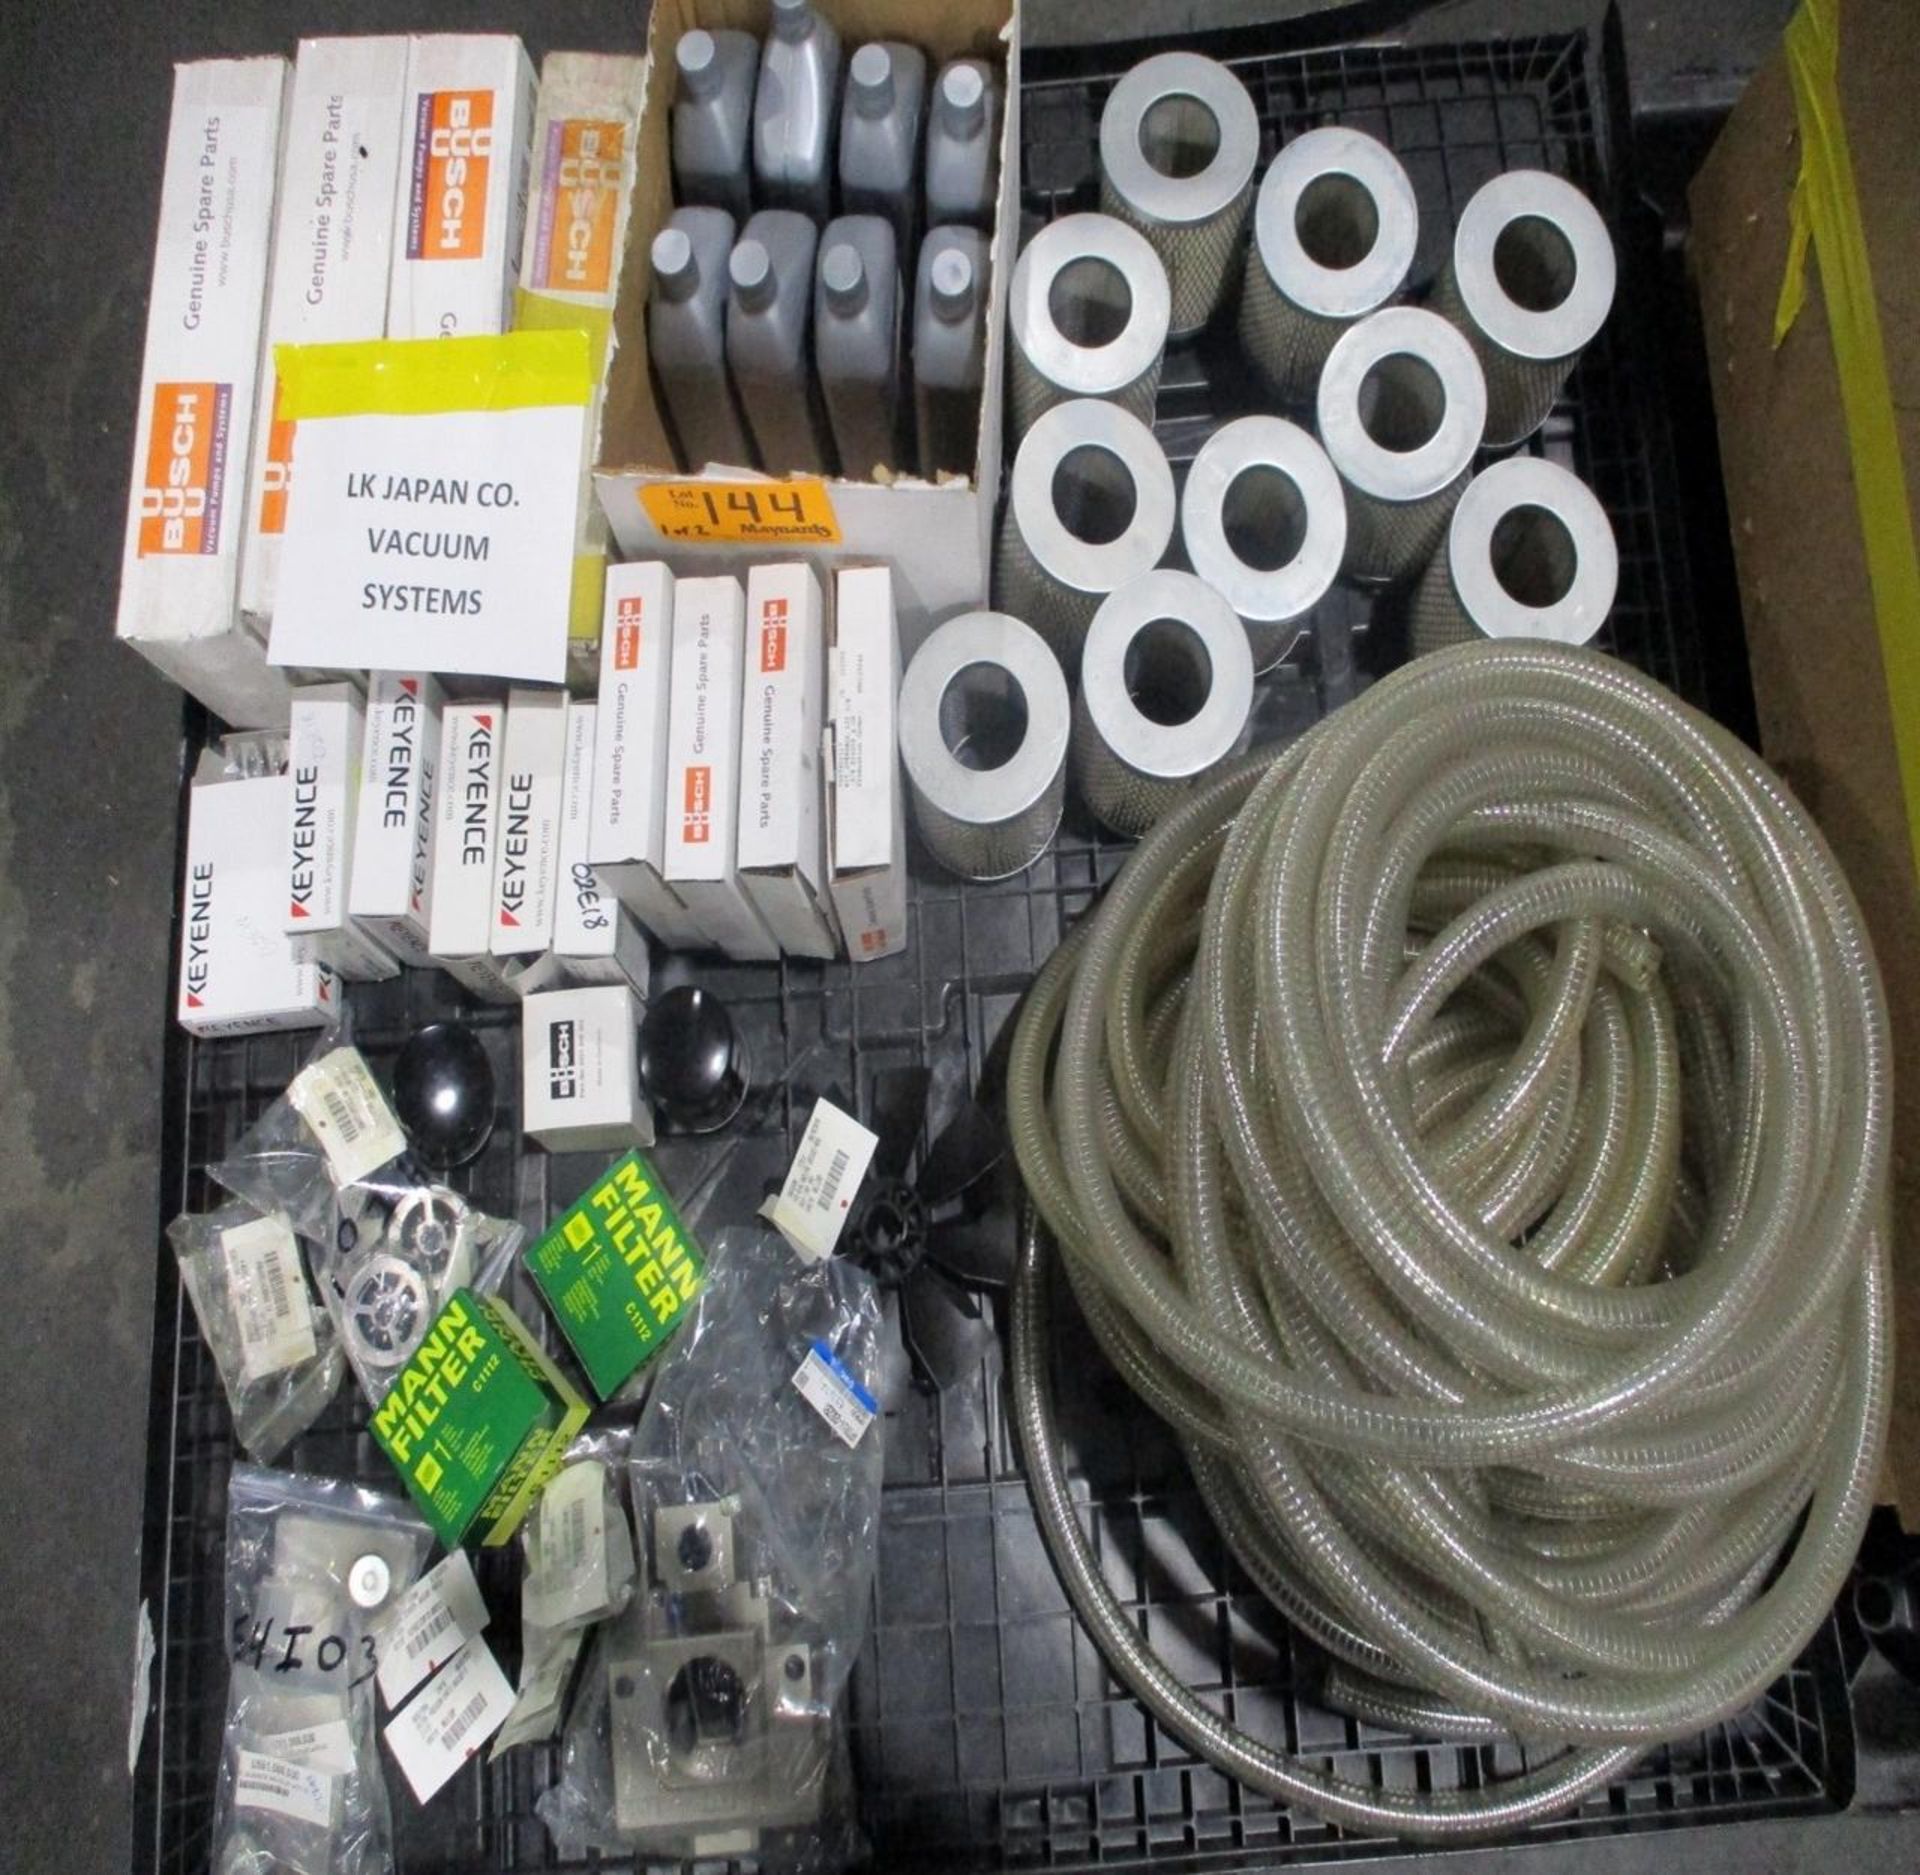 LK Japan Co Vacuum System Parts - Image 2 of 2